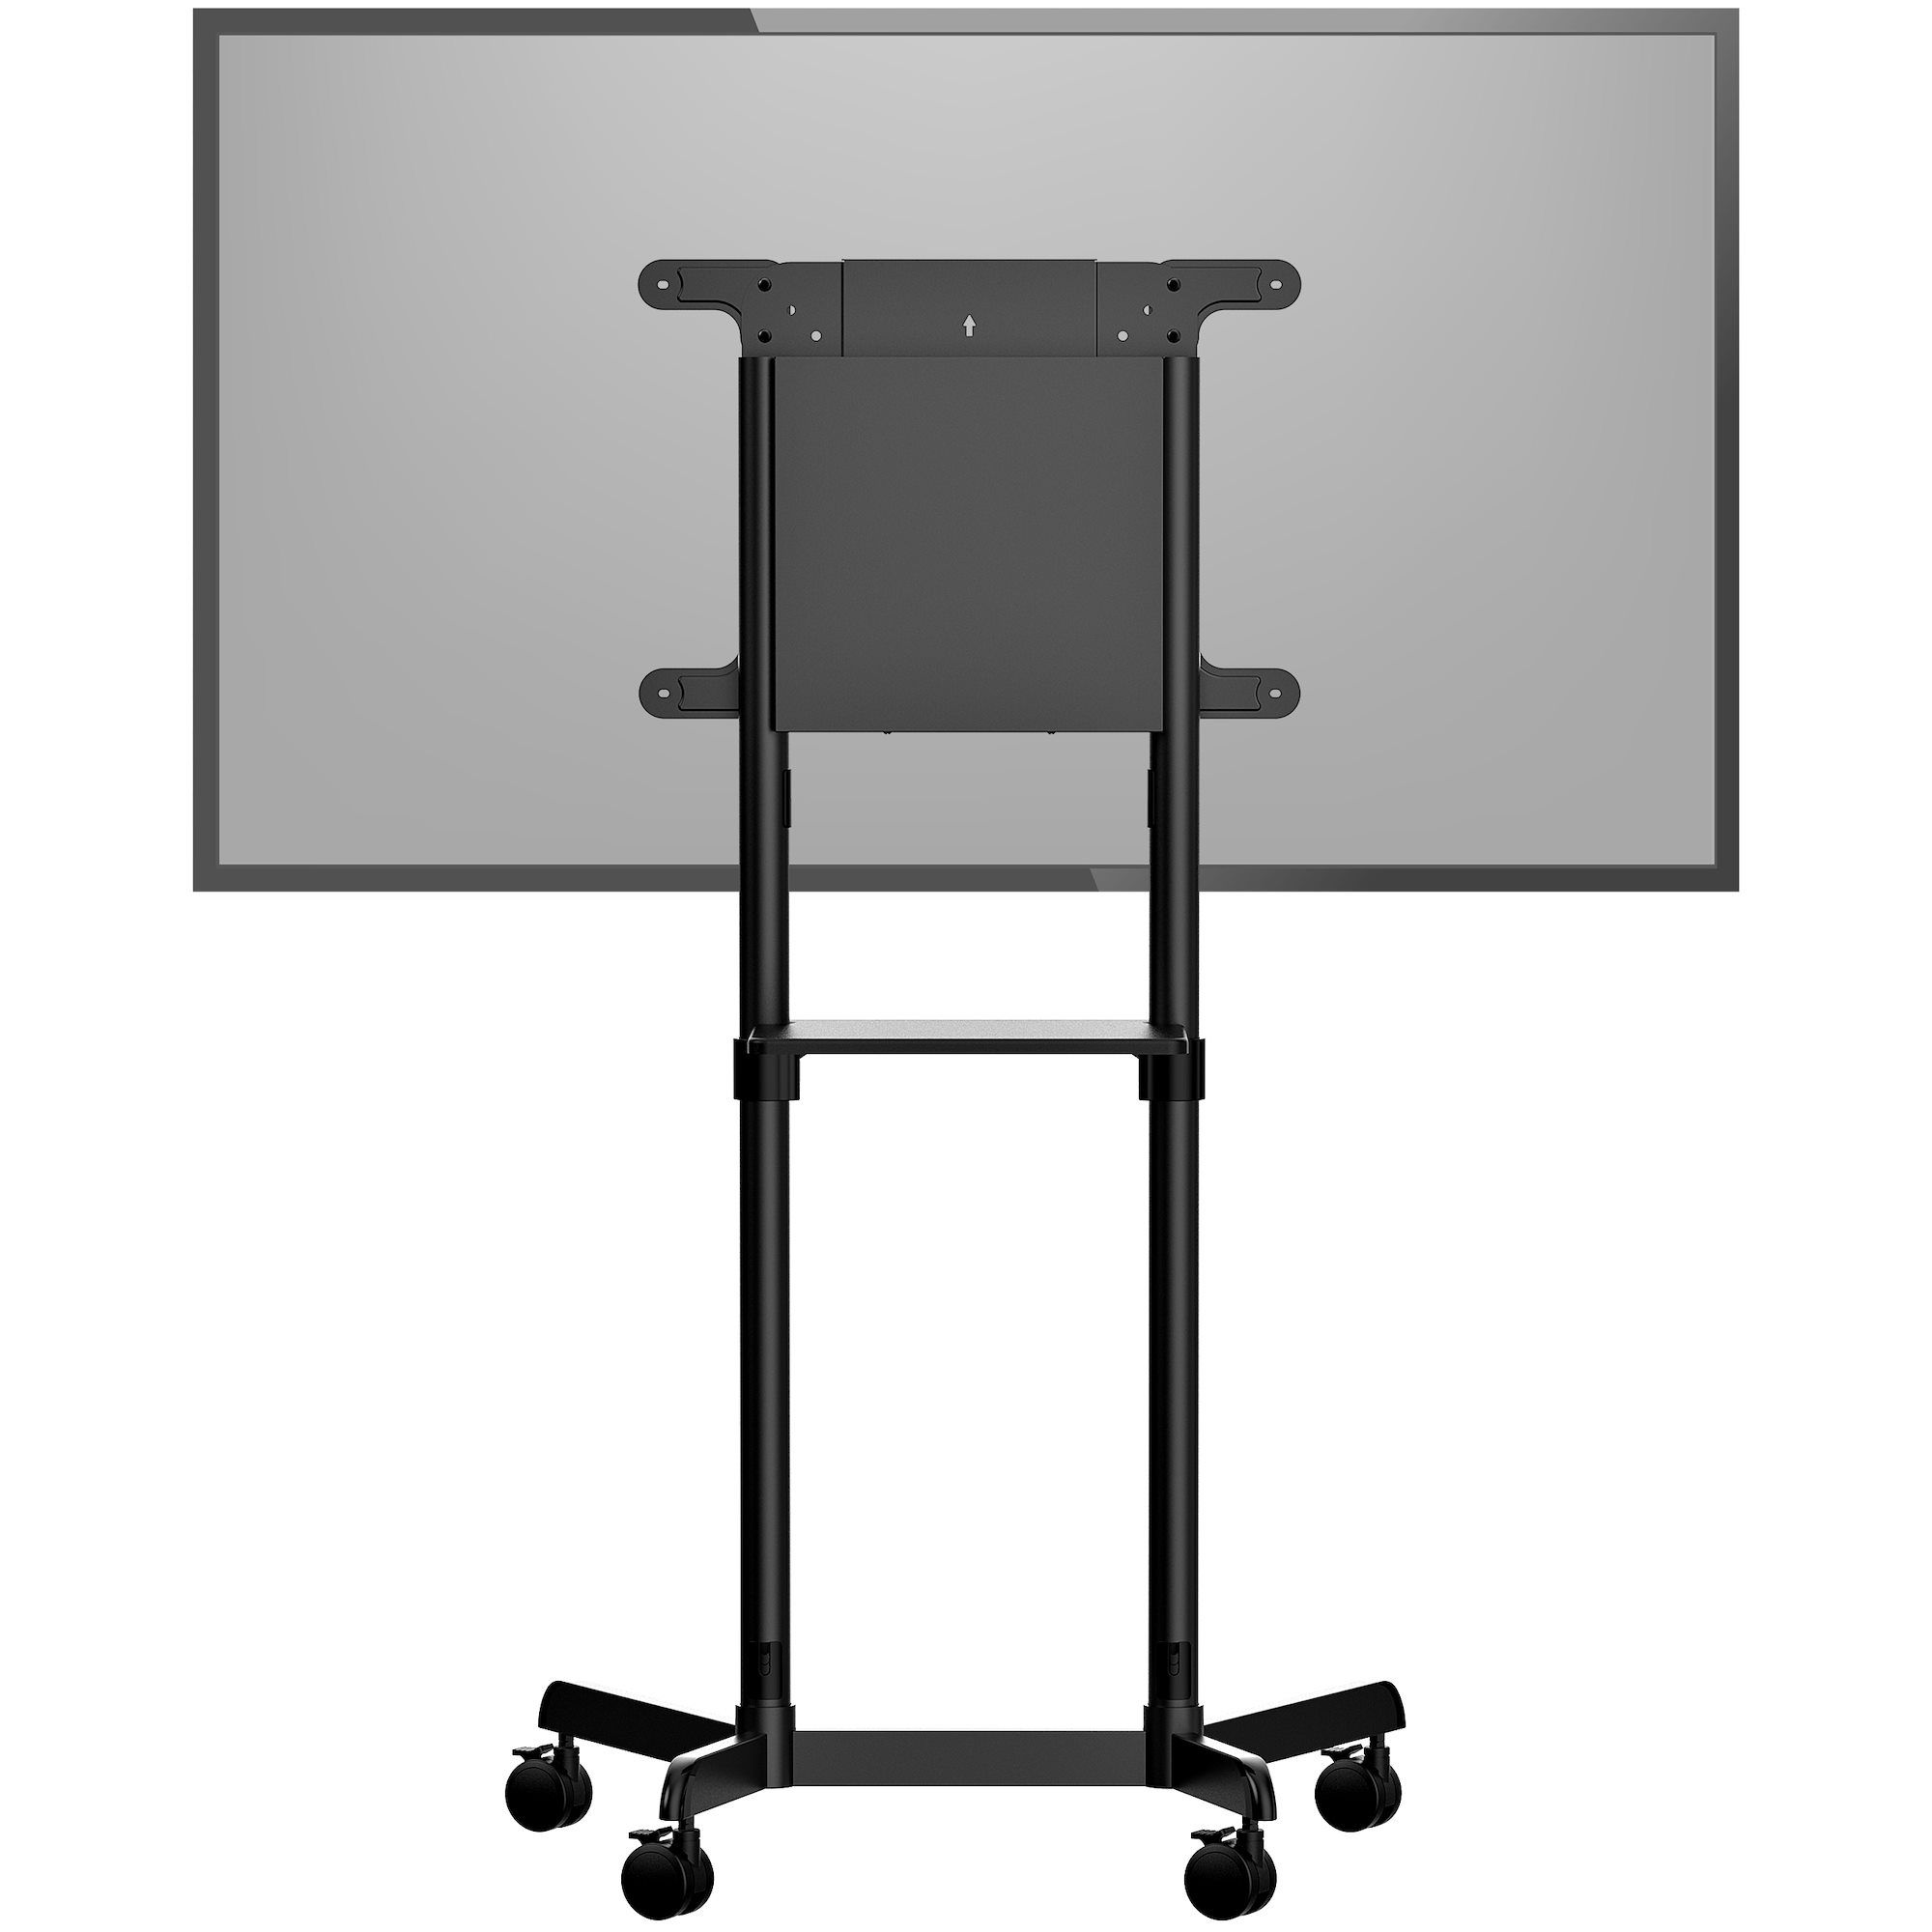 Mobile Tv Cart/Stand 37 70In Vesa Mount – Tv Mounts | Display Mounts And  Ergonomics | Startech Europe Throughout Foldable Portable Adjustable Tv Stands (View 10 of 15)